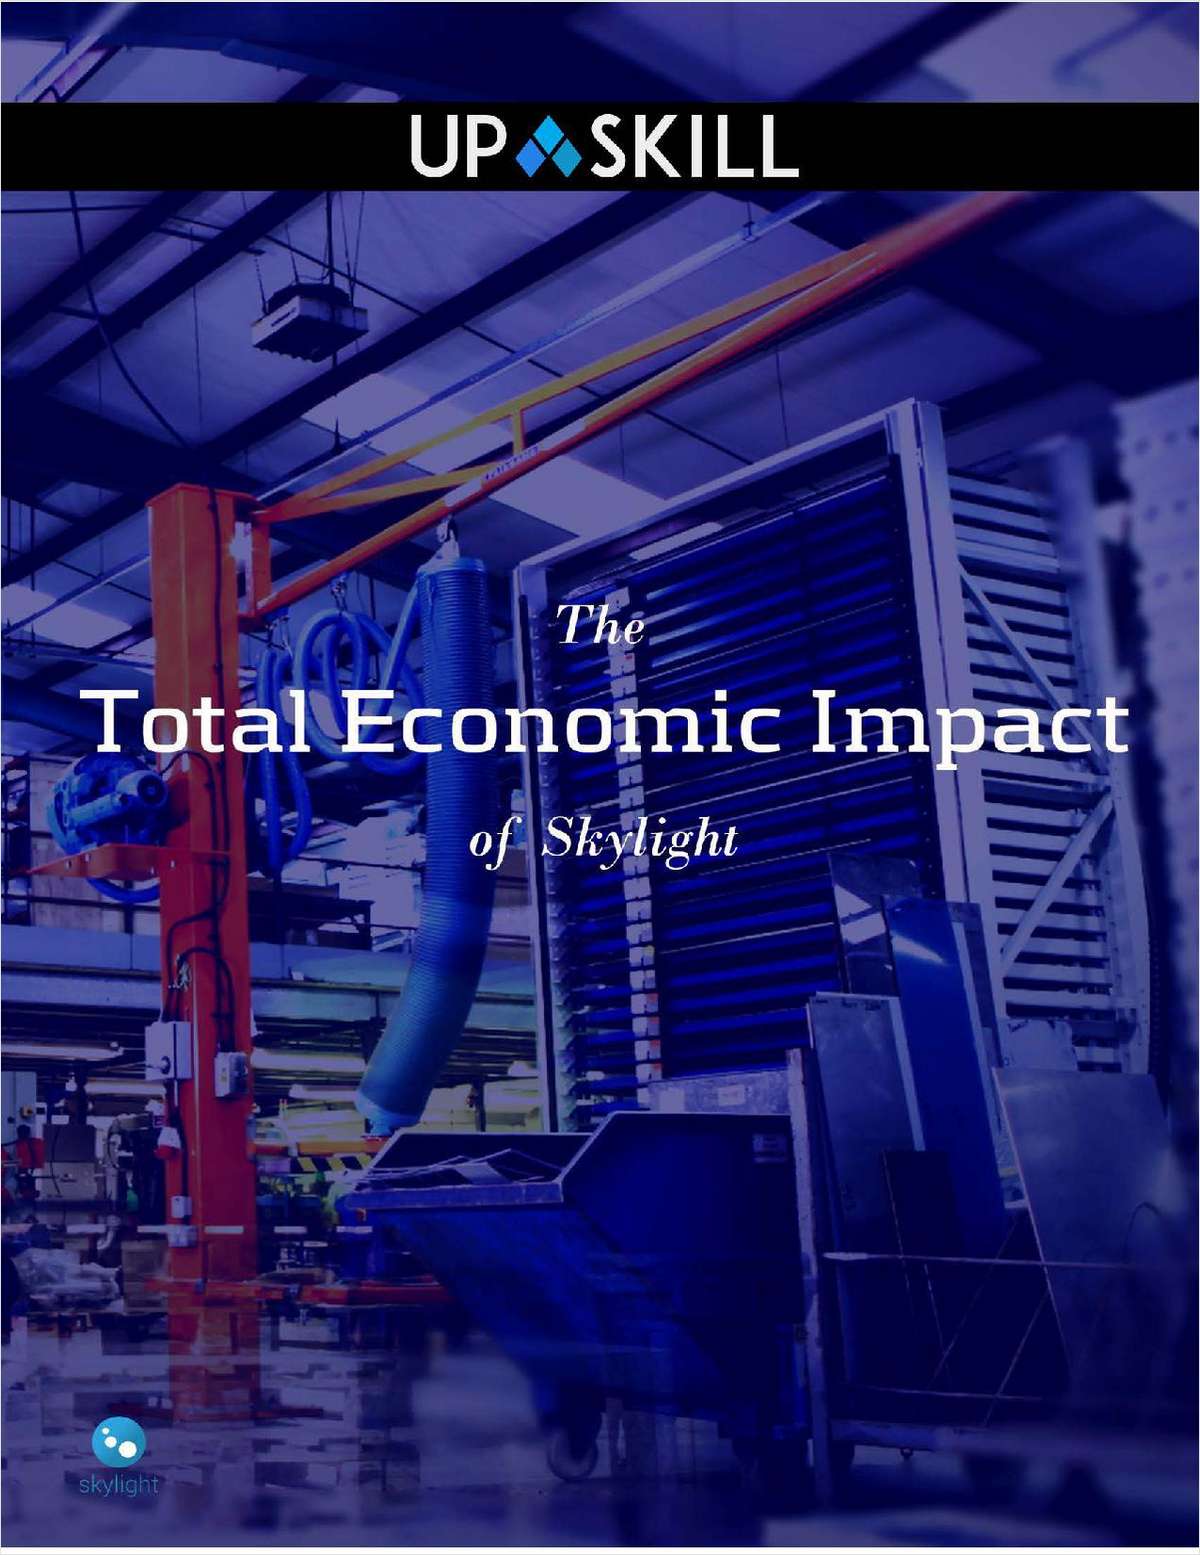 The Total Economic Impact of Wearables